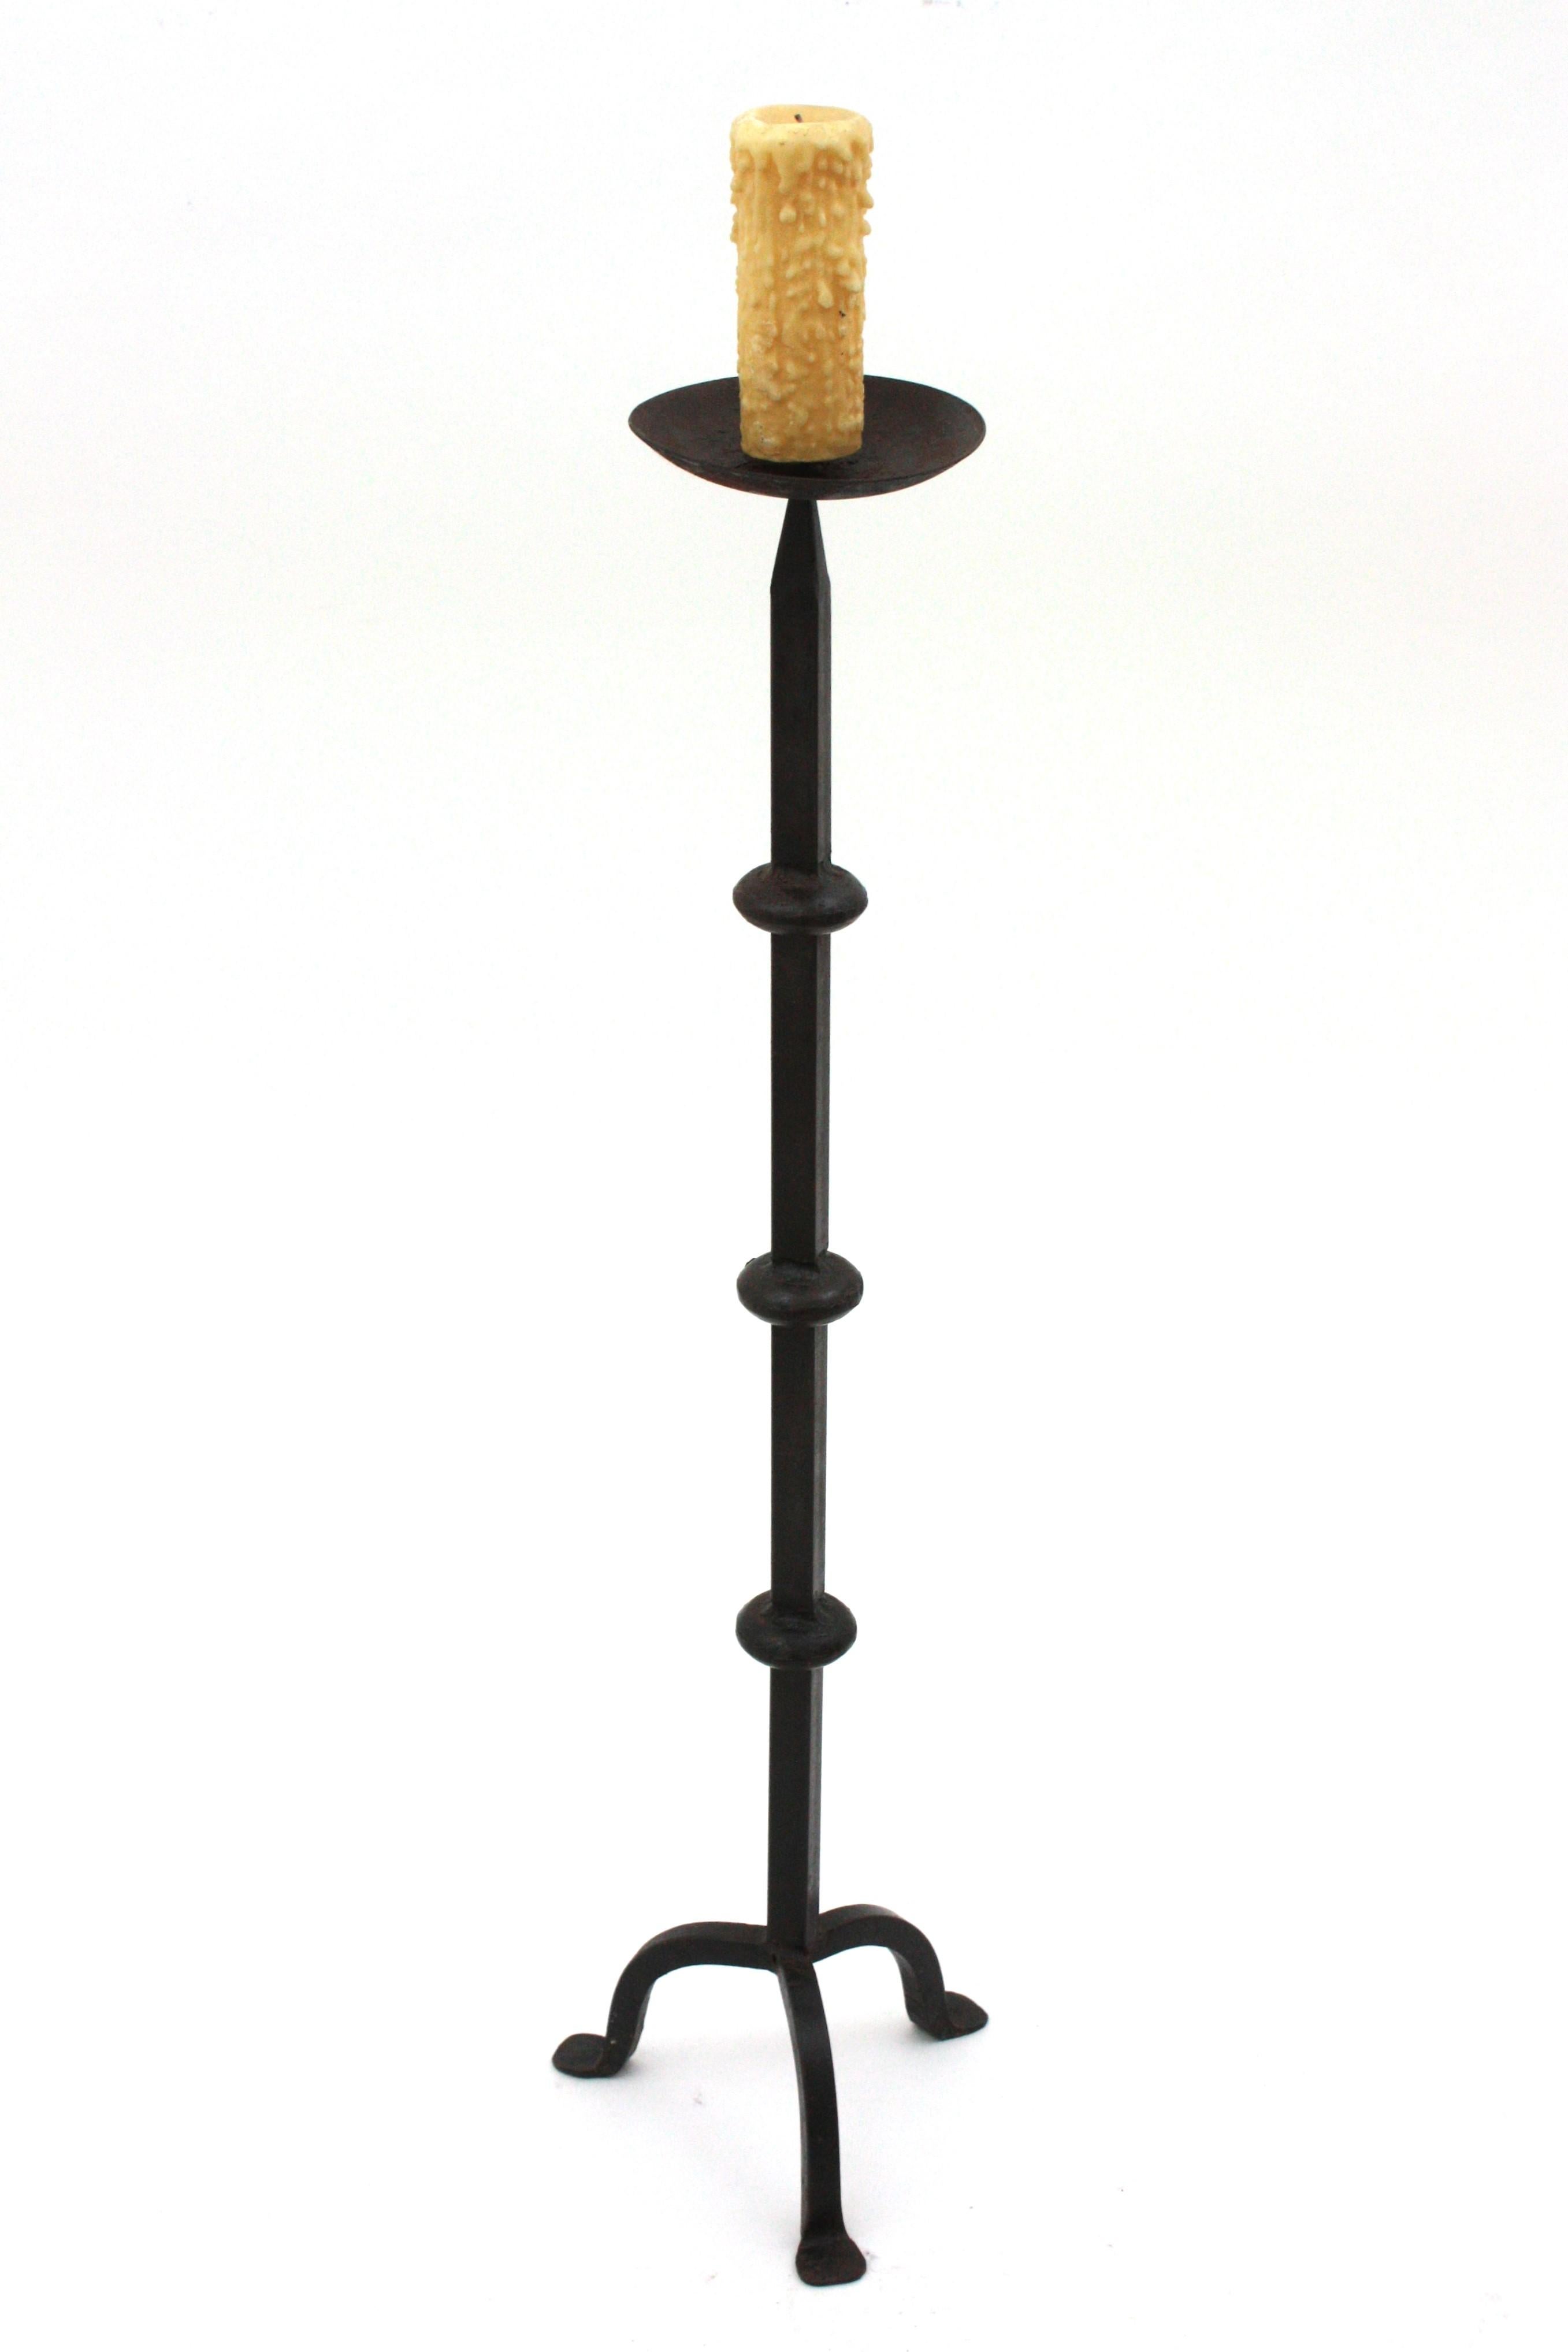 20th Century Spanish Medieval Hand Forged Iron Candle Stand / Floor Candle Holder For Sale